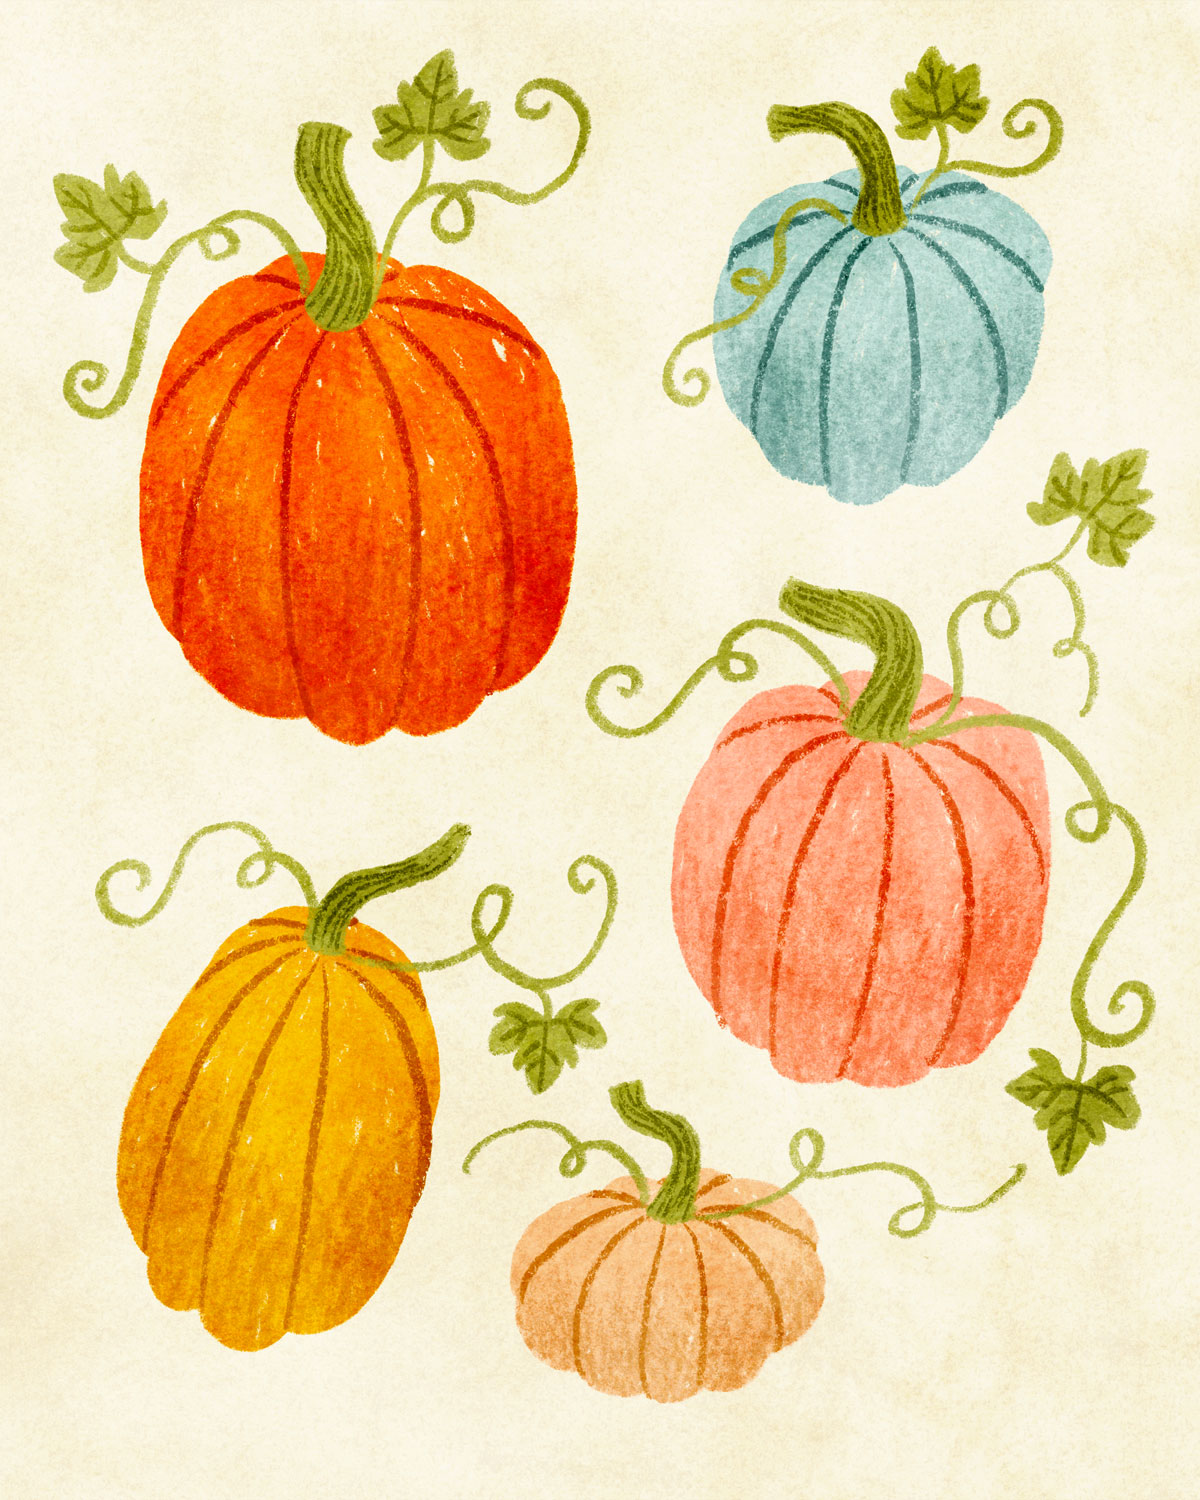 How to Draw a Realistic Pumpkin - Tombow USA Blog